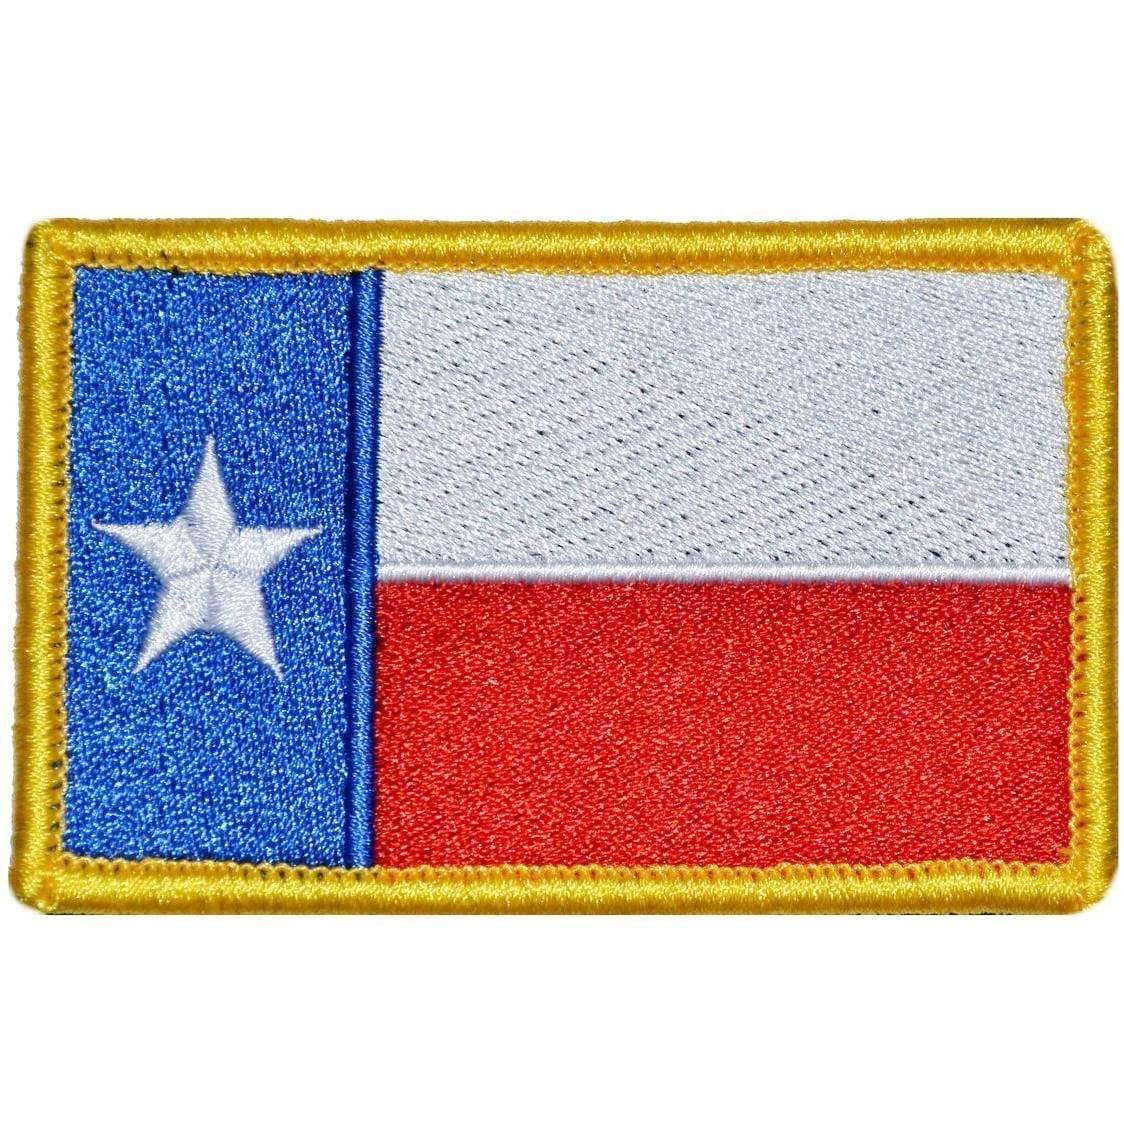 Tactical Gear Junkie Patches Full Color Texas State Flag - 2x3 Patch